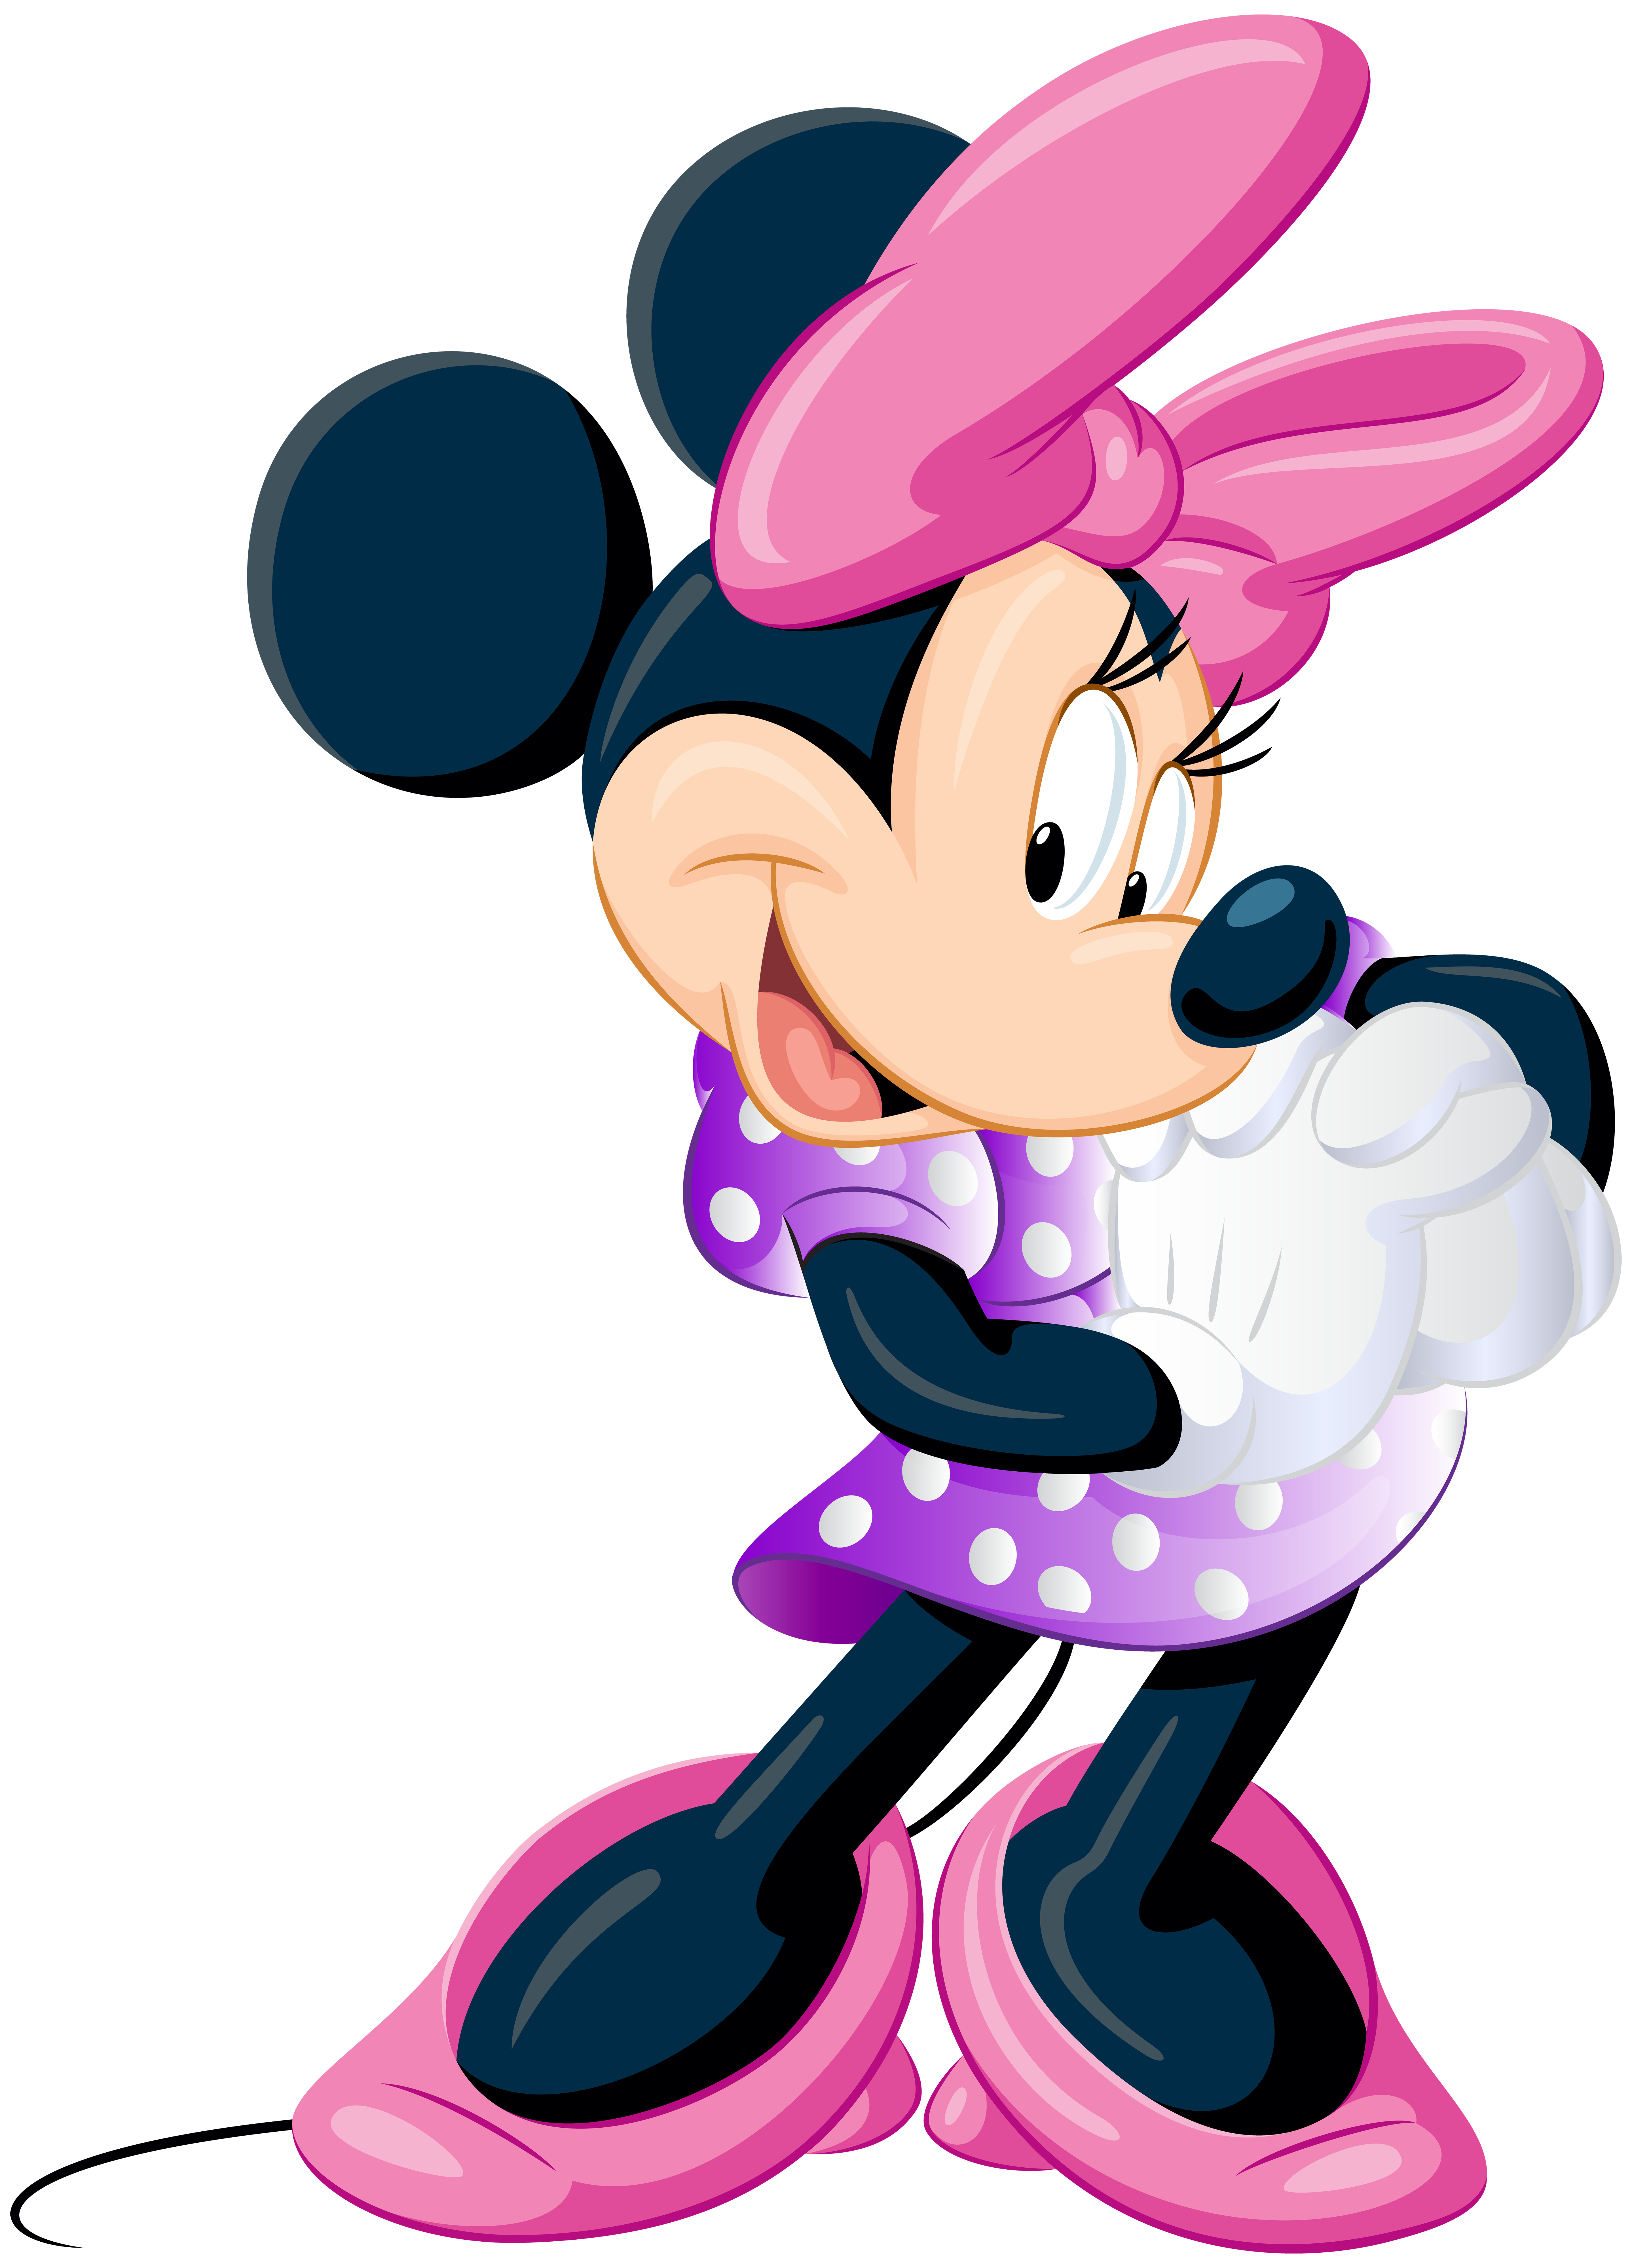 Daydreaming clipart cartoon. Minnie mouse free clip